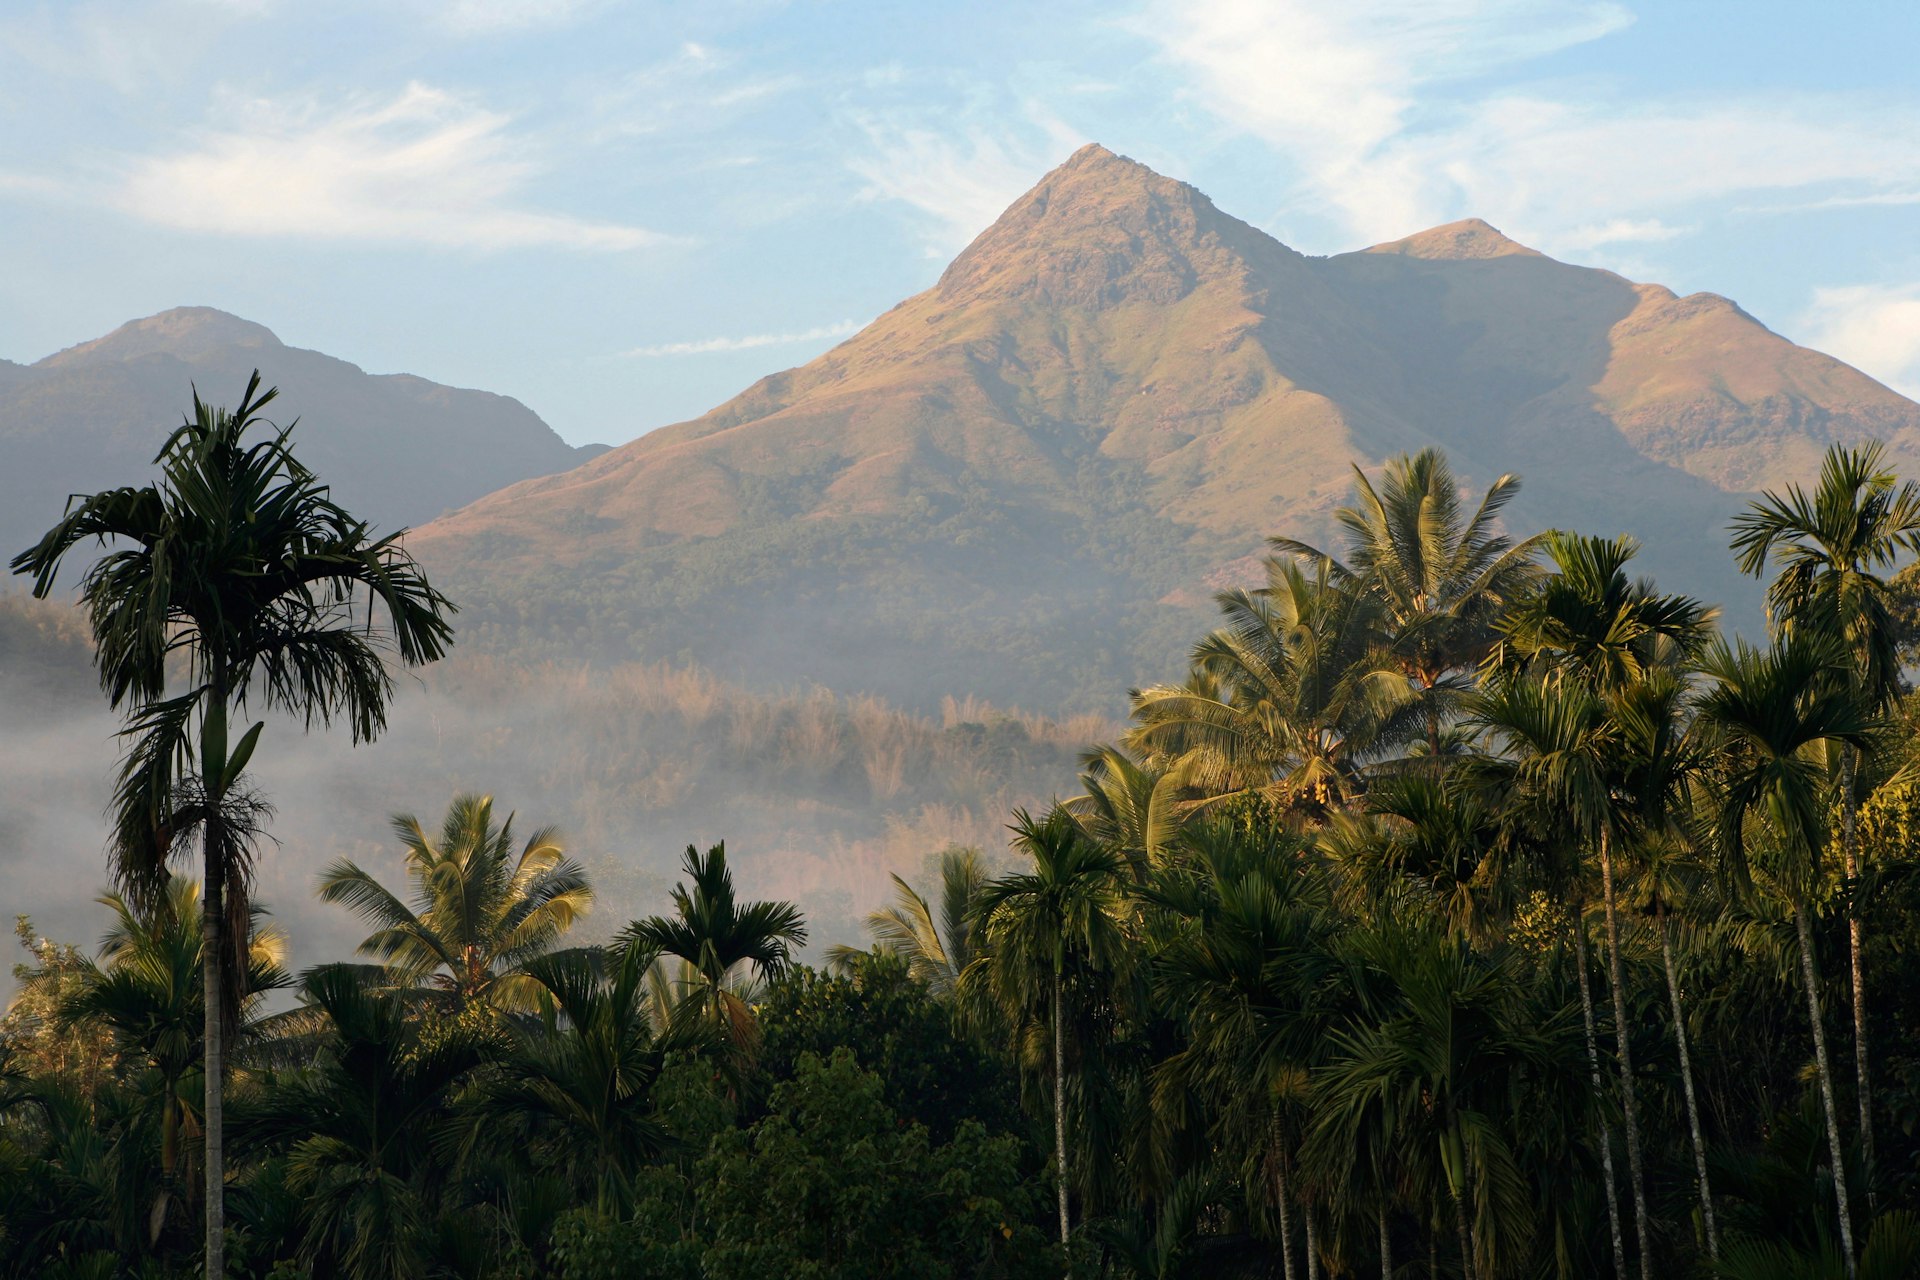 Chembra Peak rising over the palms in Wayanad © Tim Draper / Getty Images